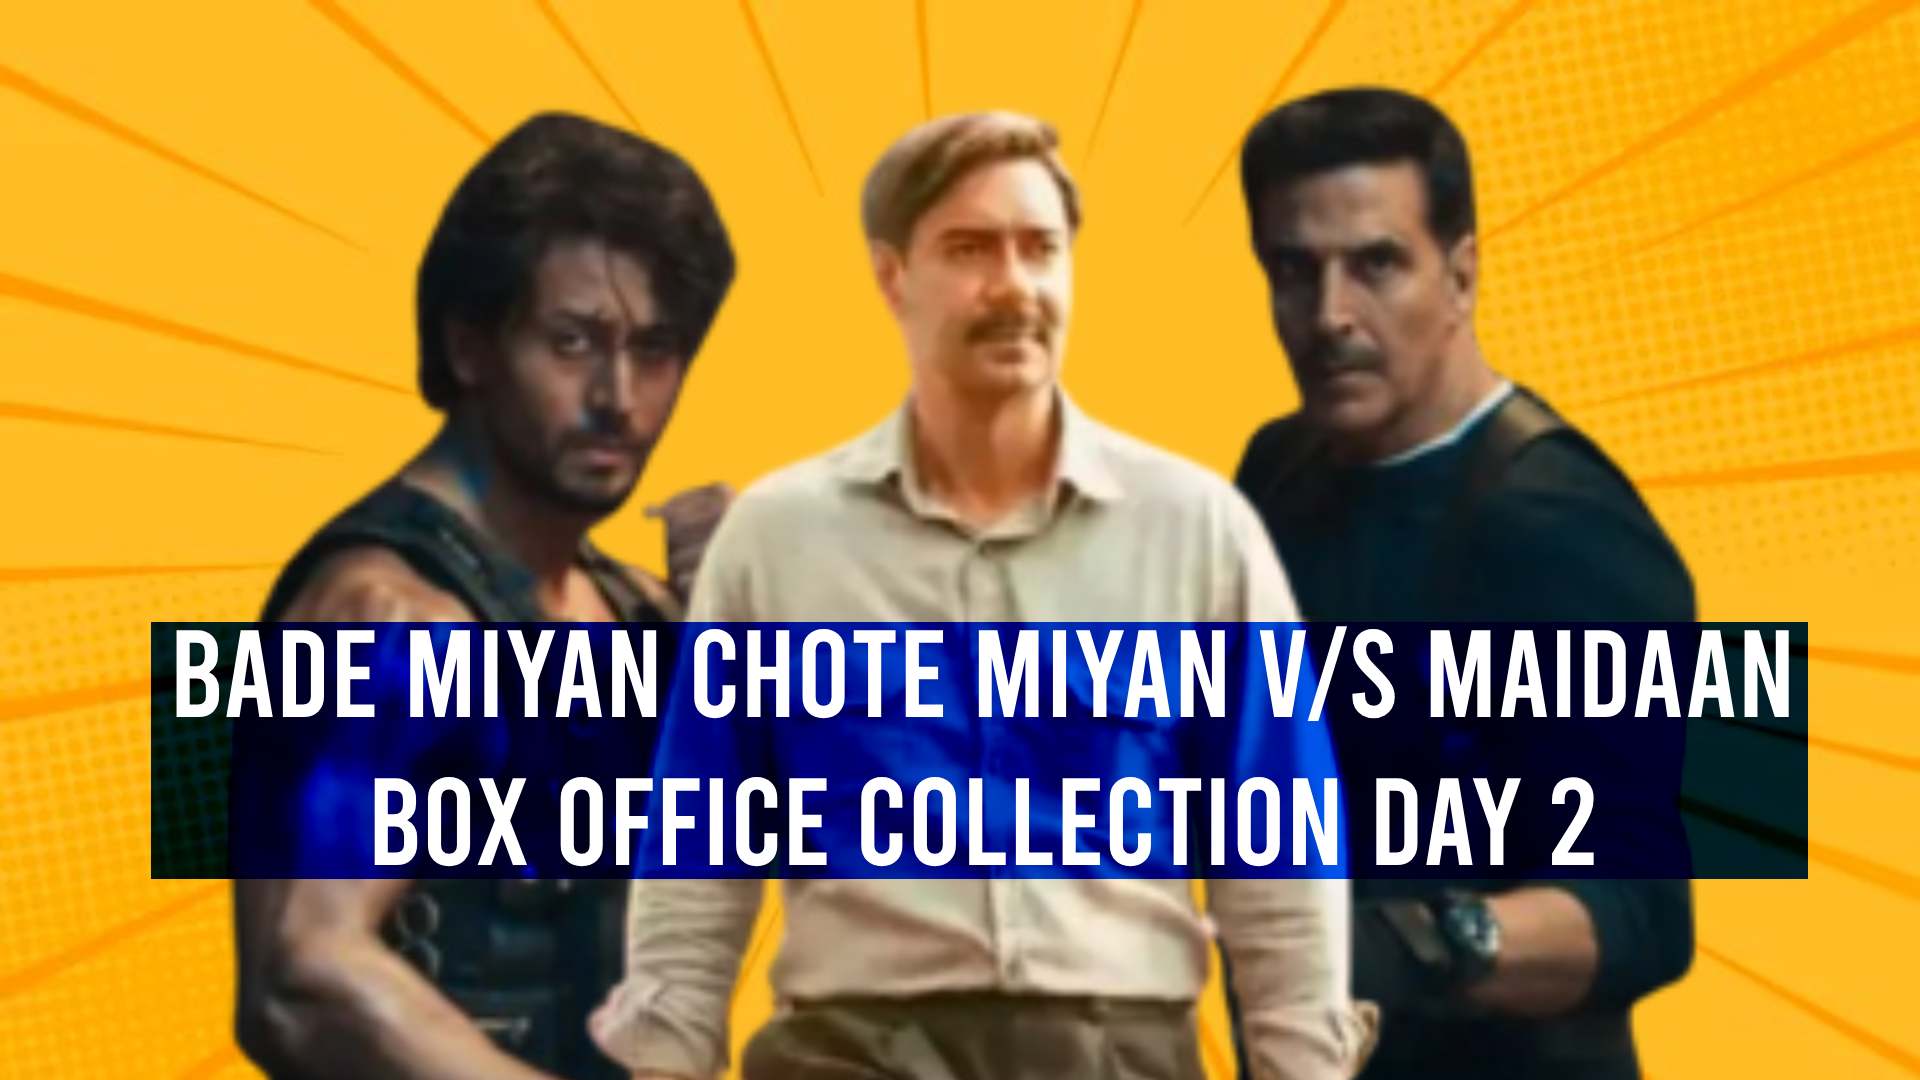 BMCM v/s Maidaan Box Office Day 2: Both films crash to shockingly low numbers 891222